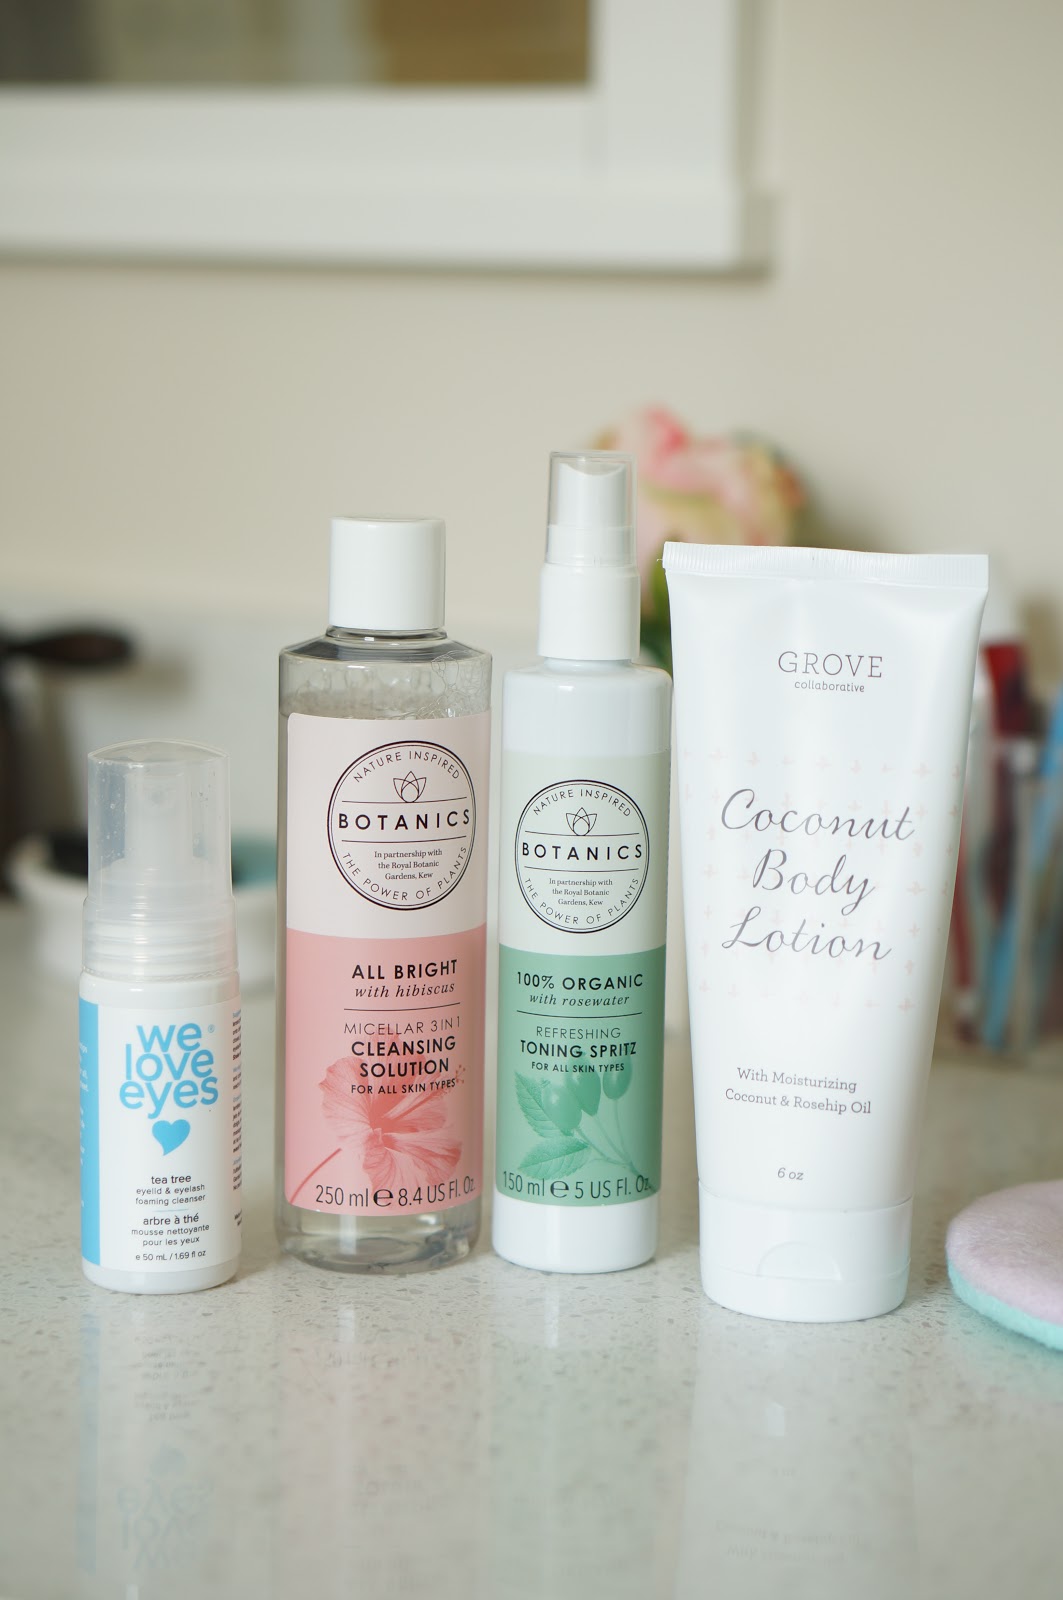 Popular North Carolina style blogger Rebecca Lately shares her spring cruelty free favorites.  Click here to read about her favorite beauty products!